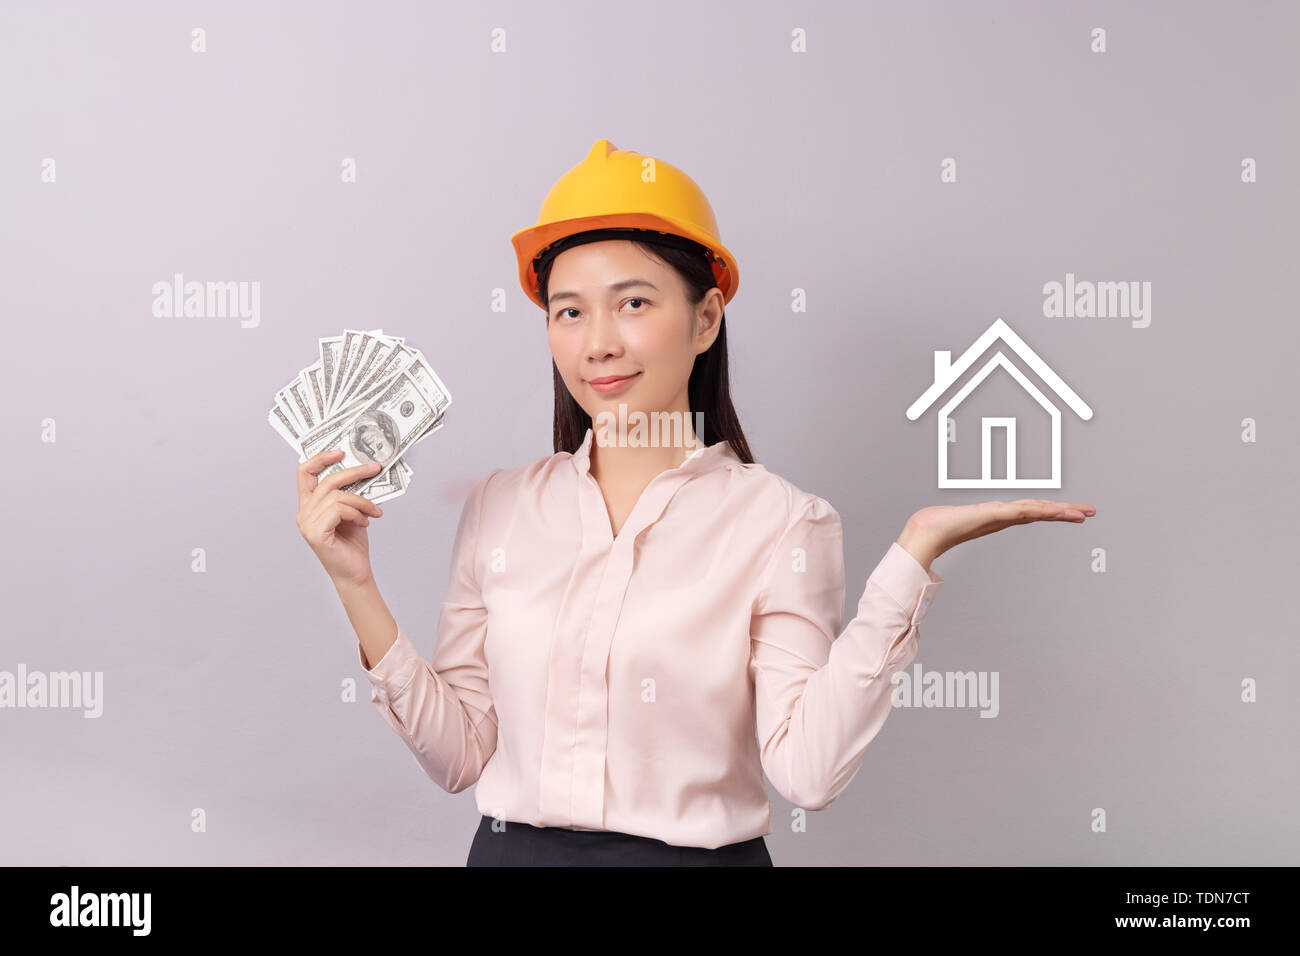 loans for real estate concept, woman with yellow helmet holding banknote money in hand and white logo home icon in another hand Stock Photo